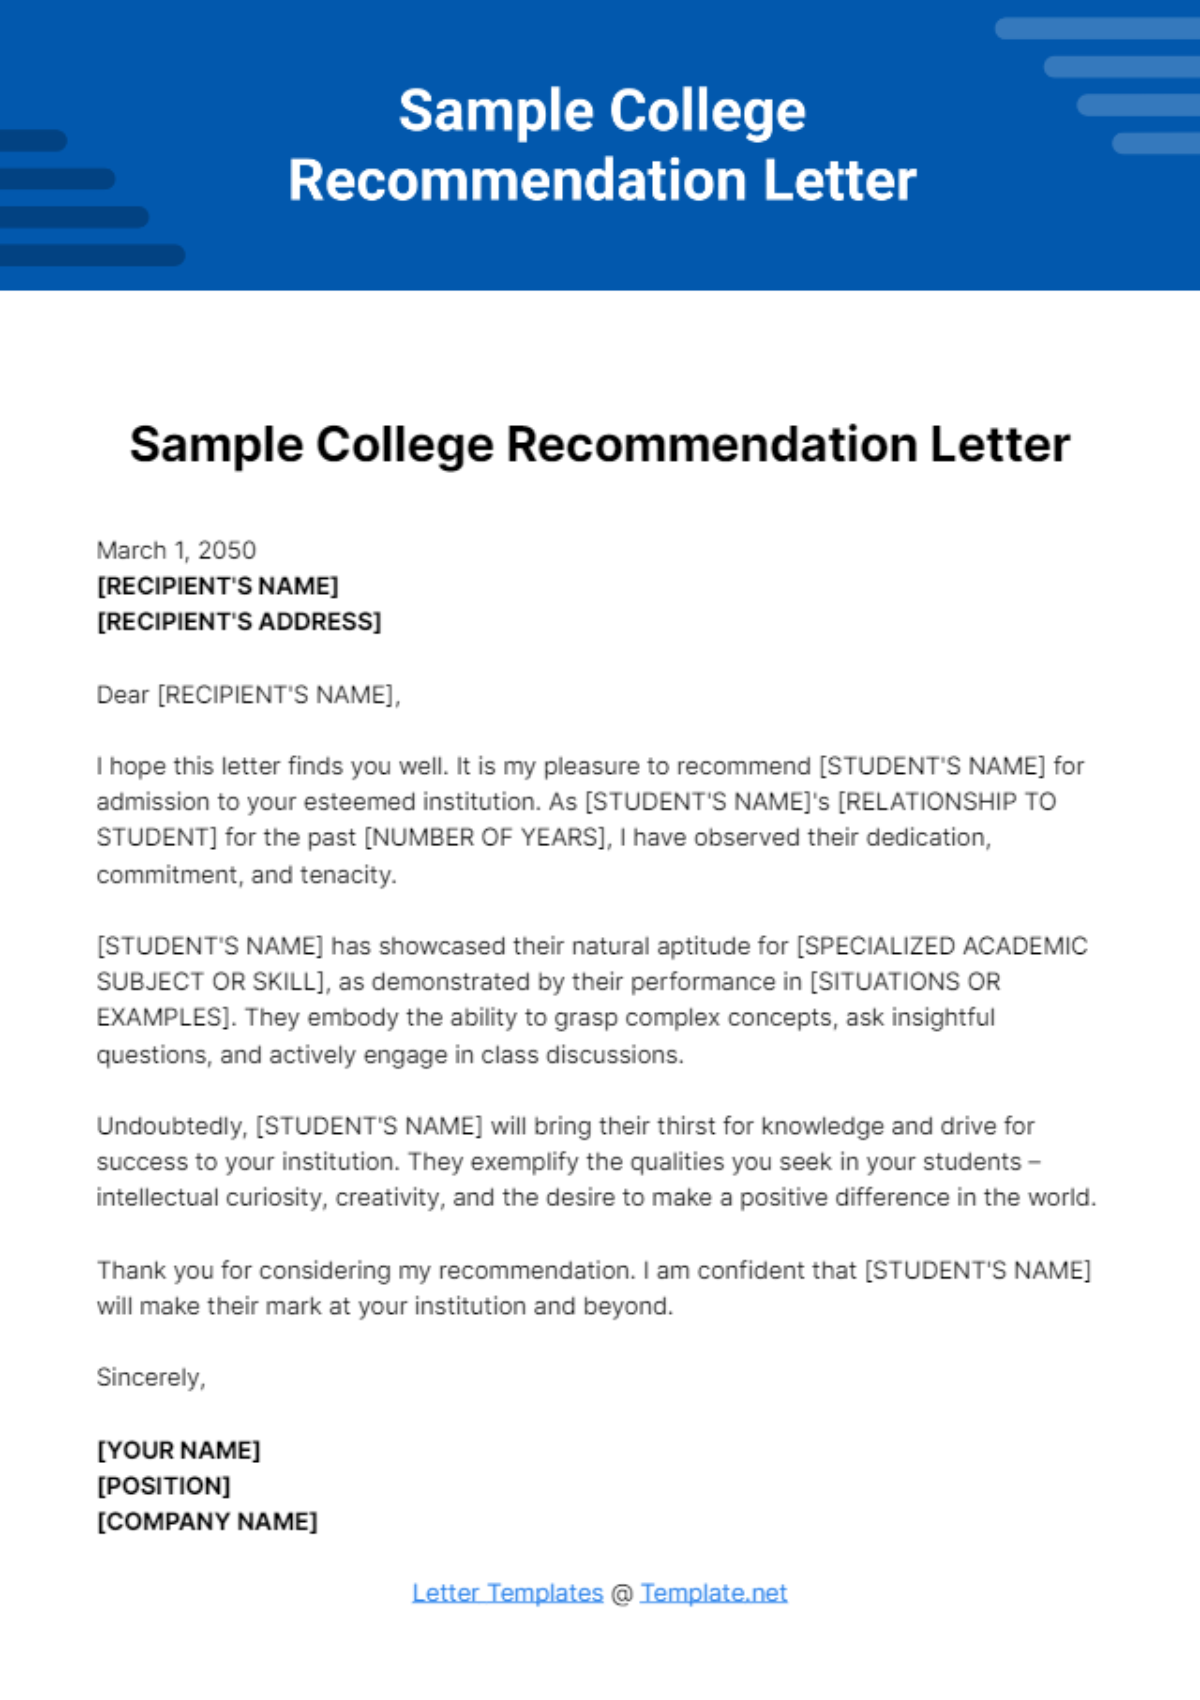 Free Sample College Recommendation Letter Template